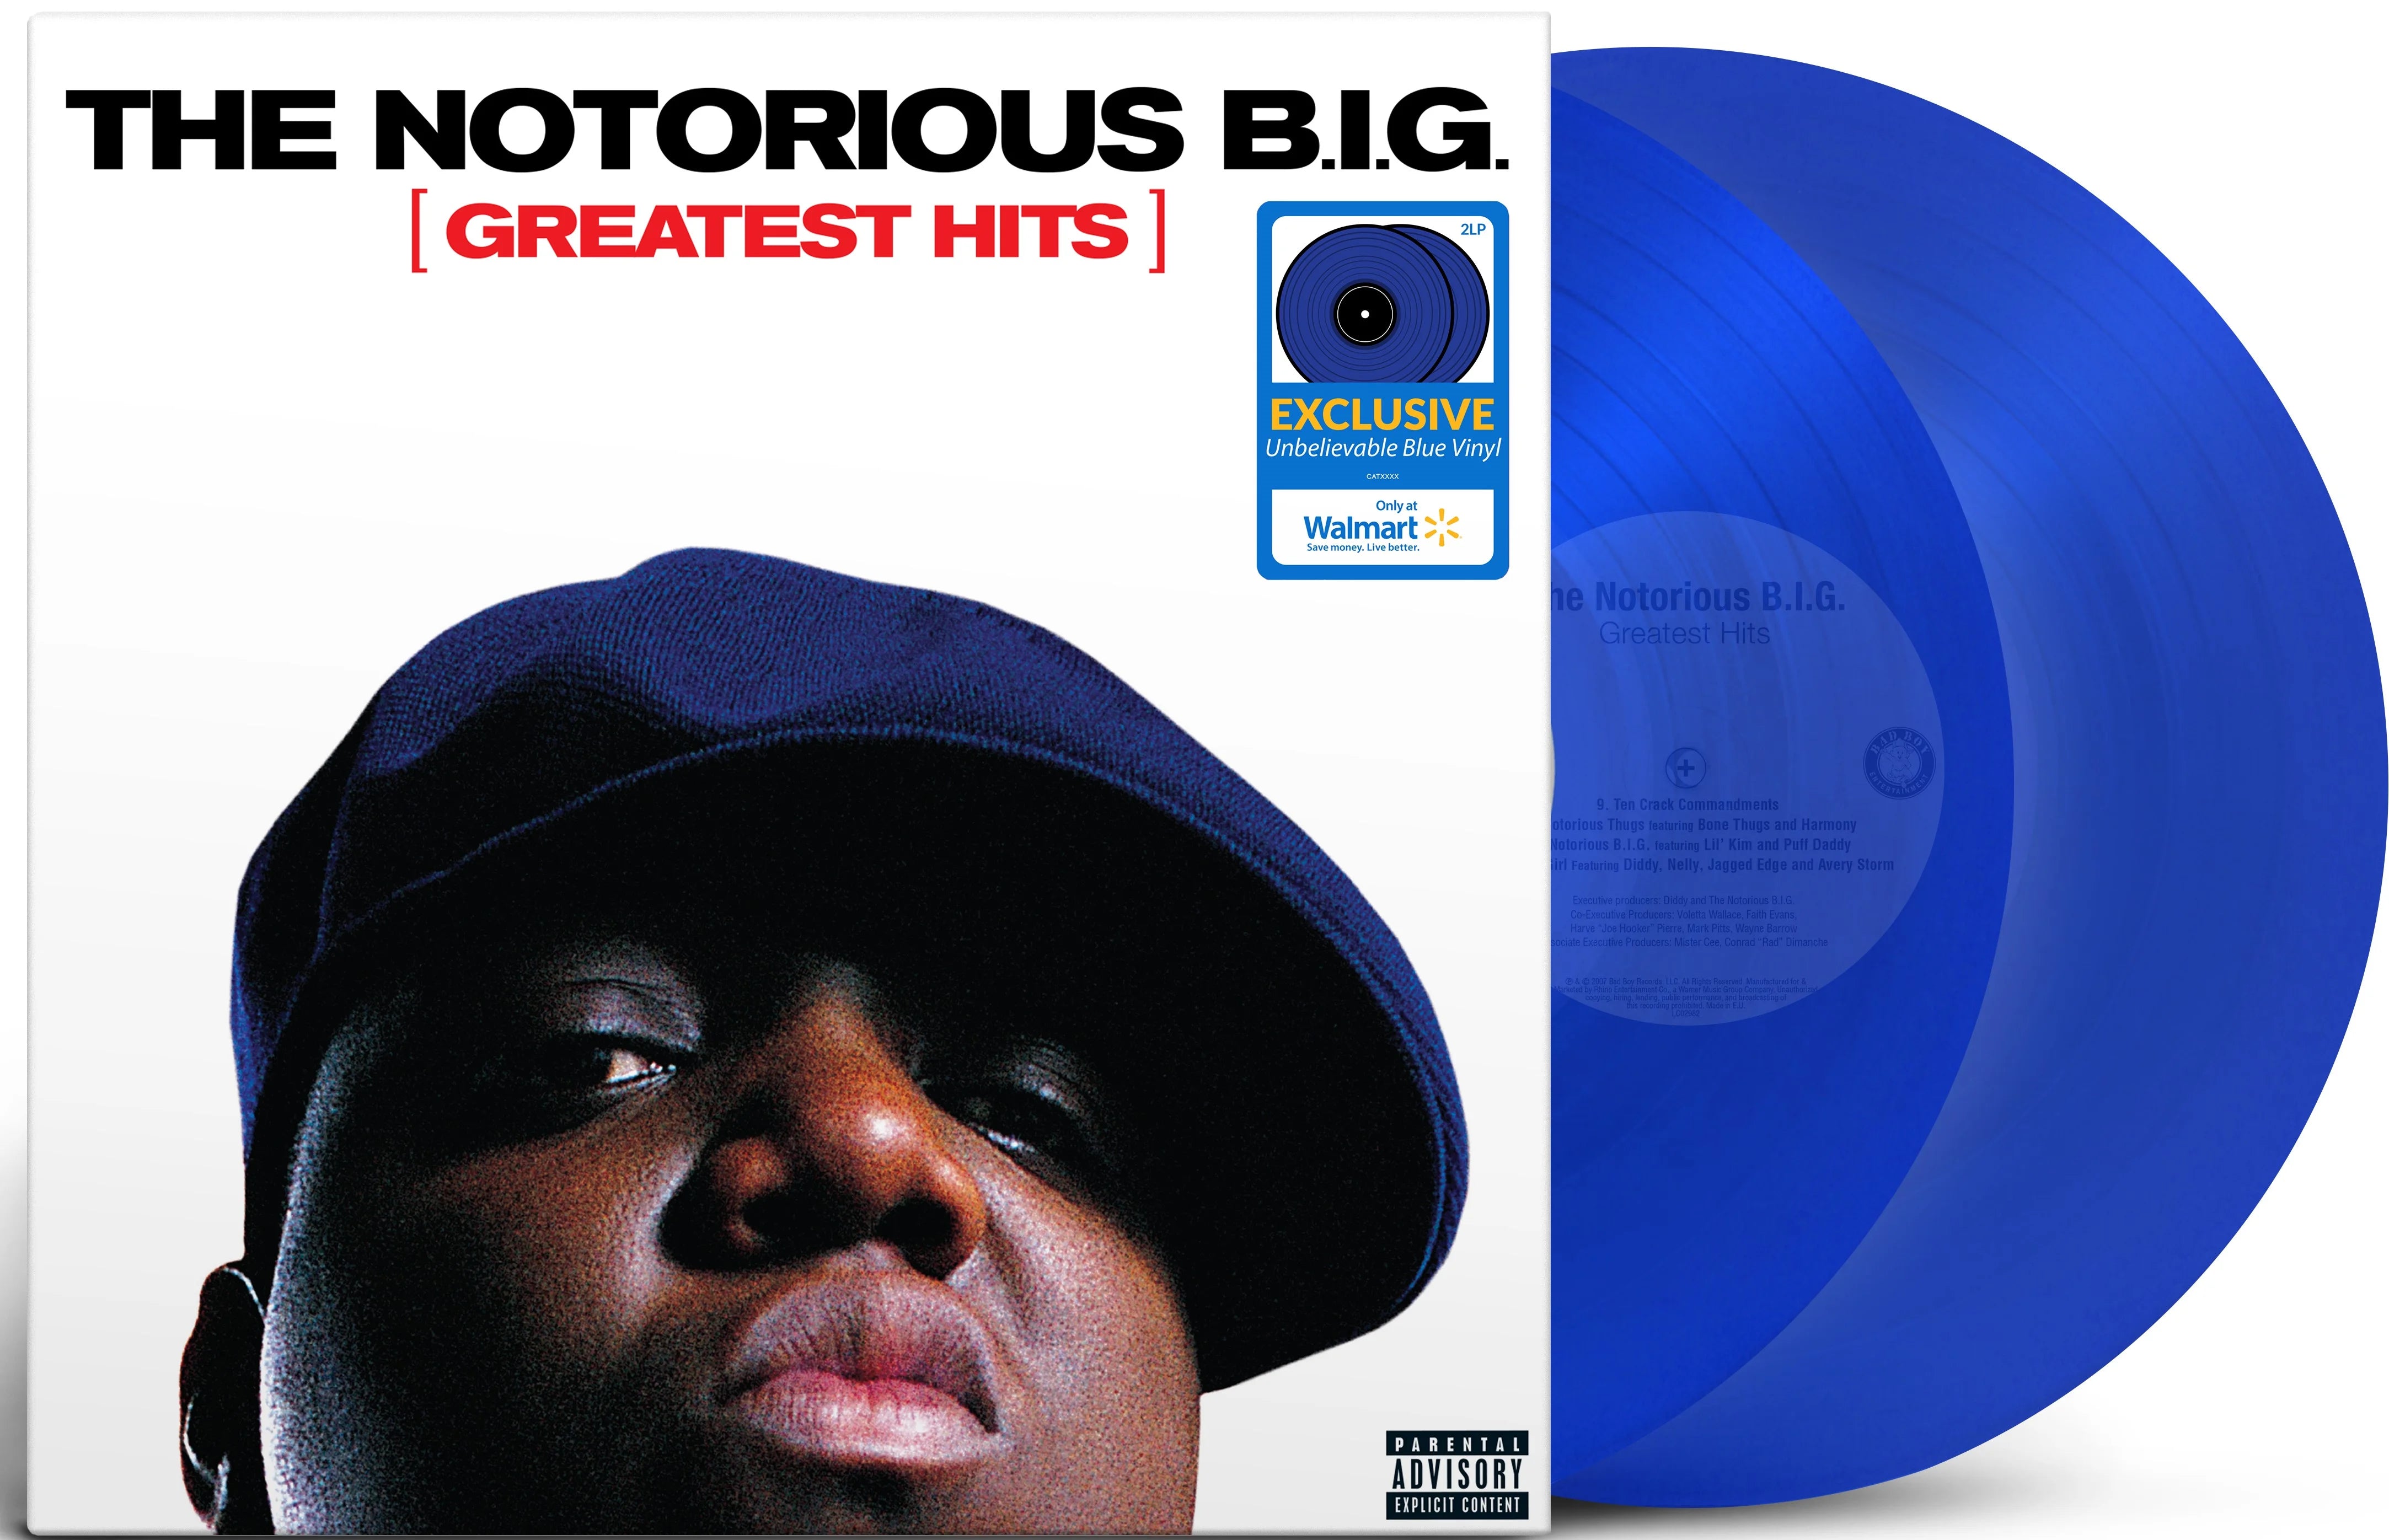 The Notorious B.I.G. – Greatest Hits 2LP (Limited Edition Blue Vinyl Reissue)